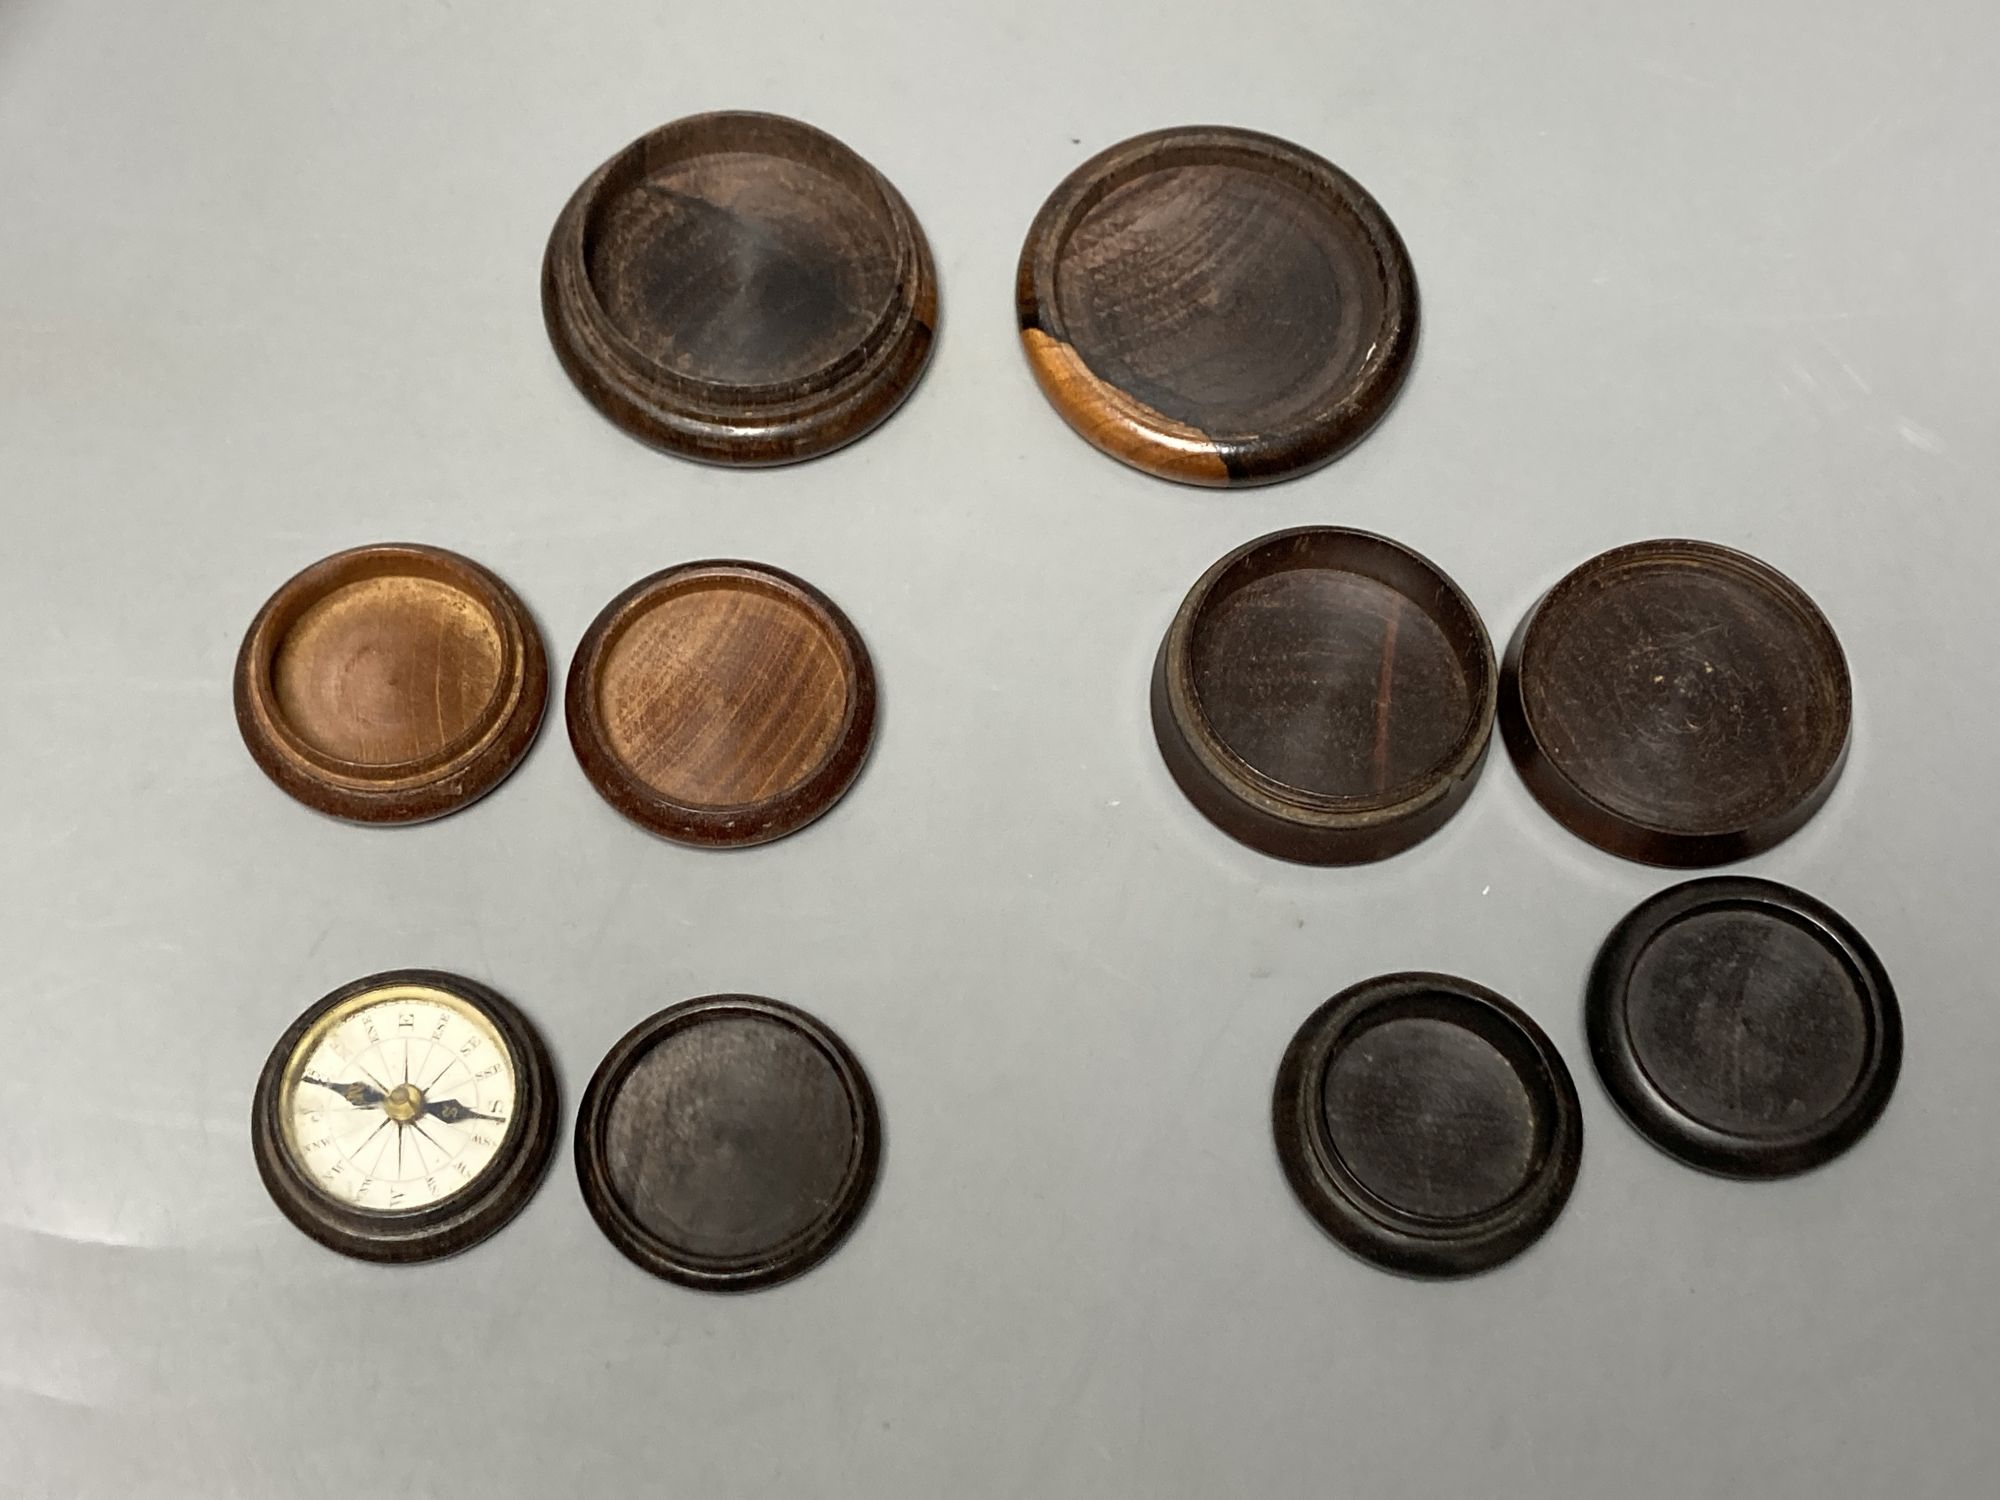 Five Tunbridge ware turned rosewood or mahogany boxes, late 19th/early 20th century, largest 5.8cm, the covers inlaid with tesserae or half square mosaic, one enclosing a compass, 3.8cm